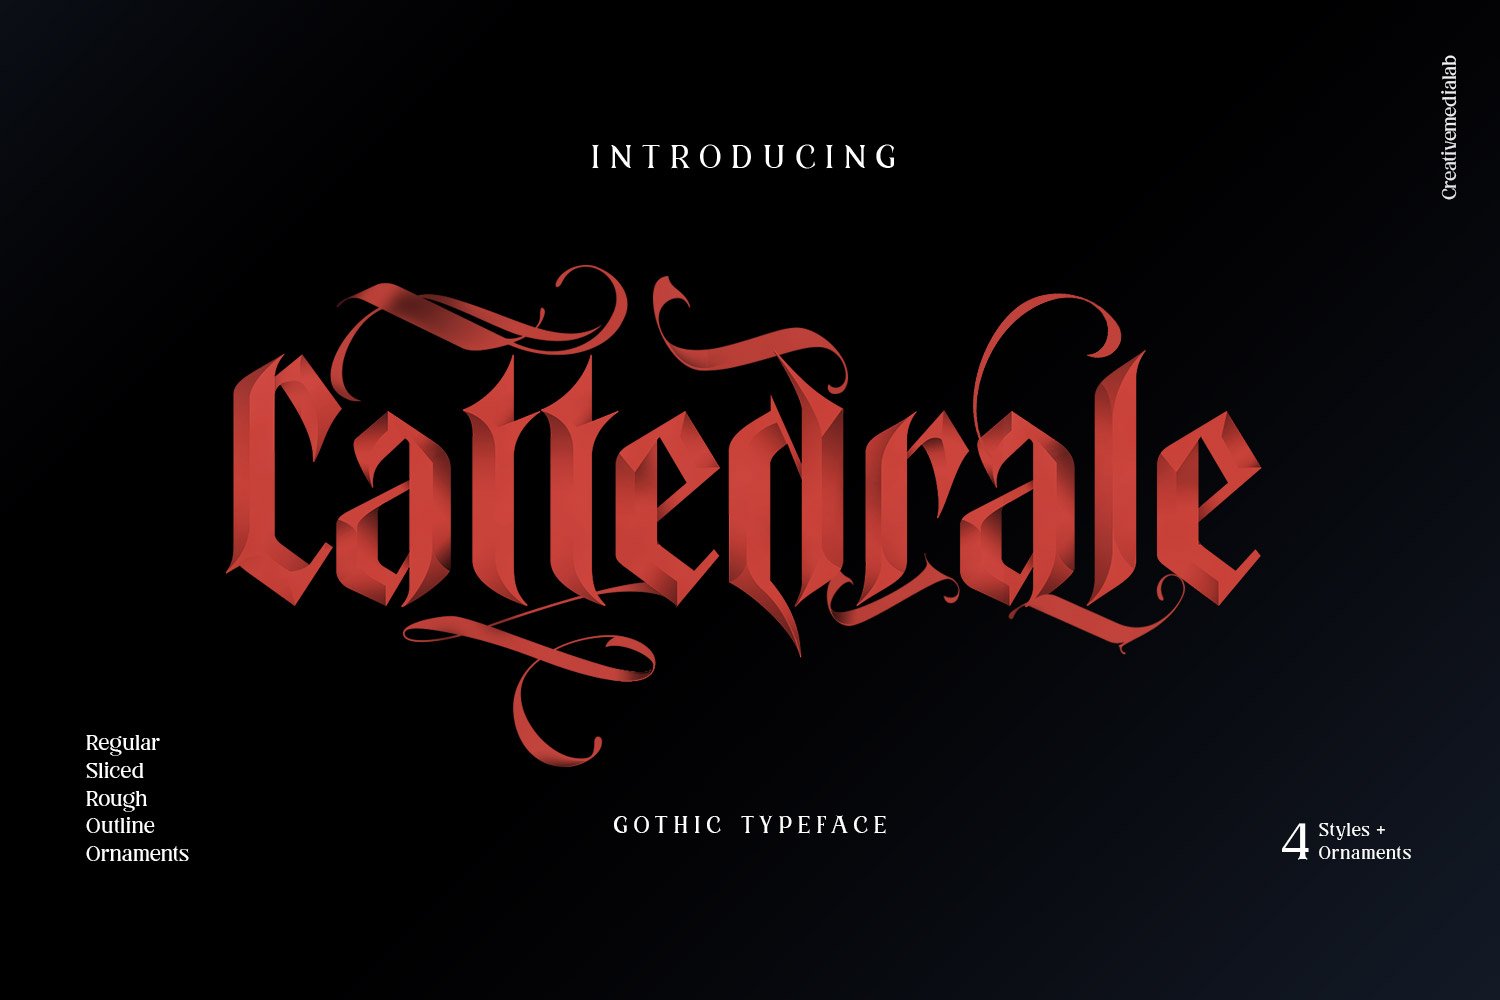 Cattedrale | Gothic Blackletter cover image.